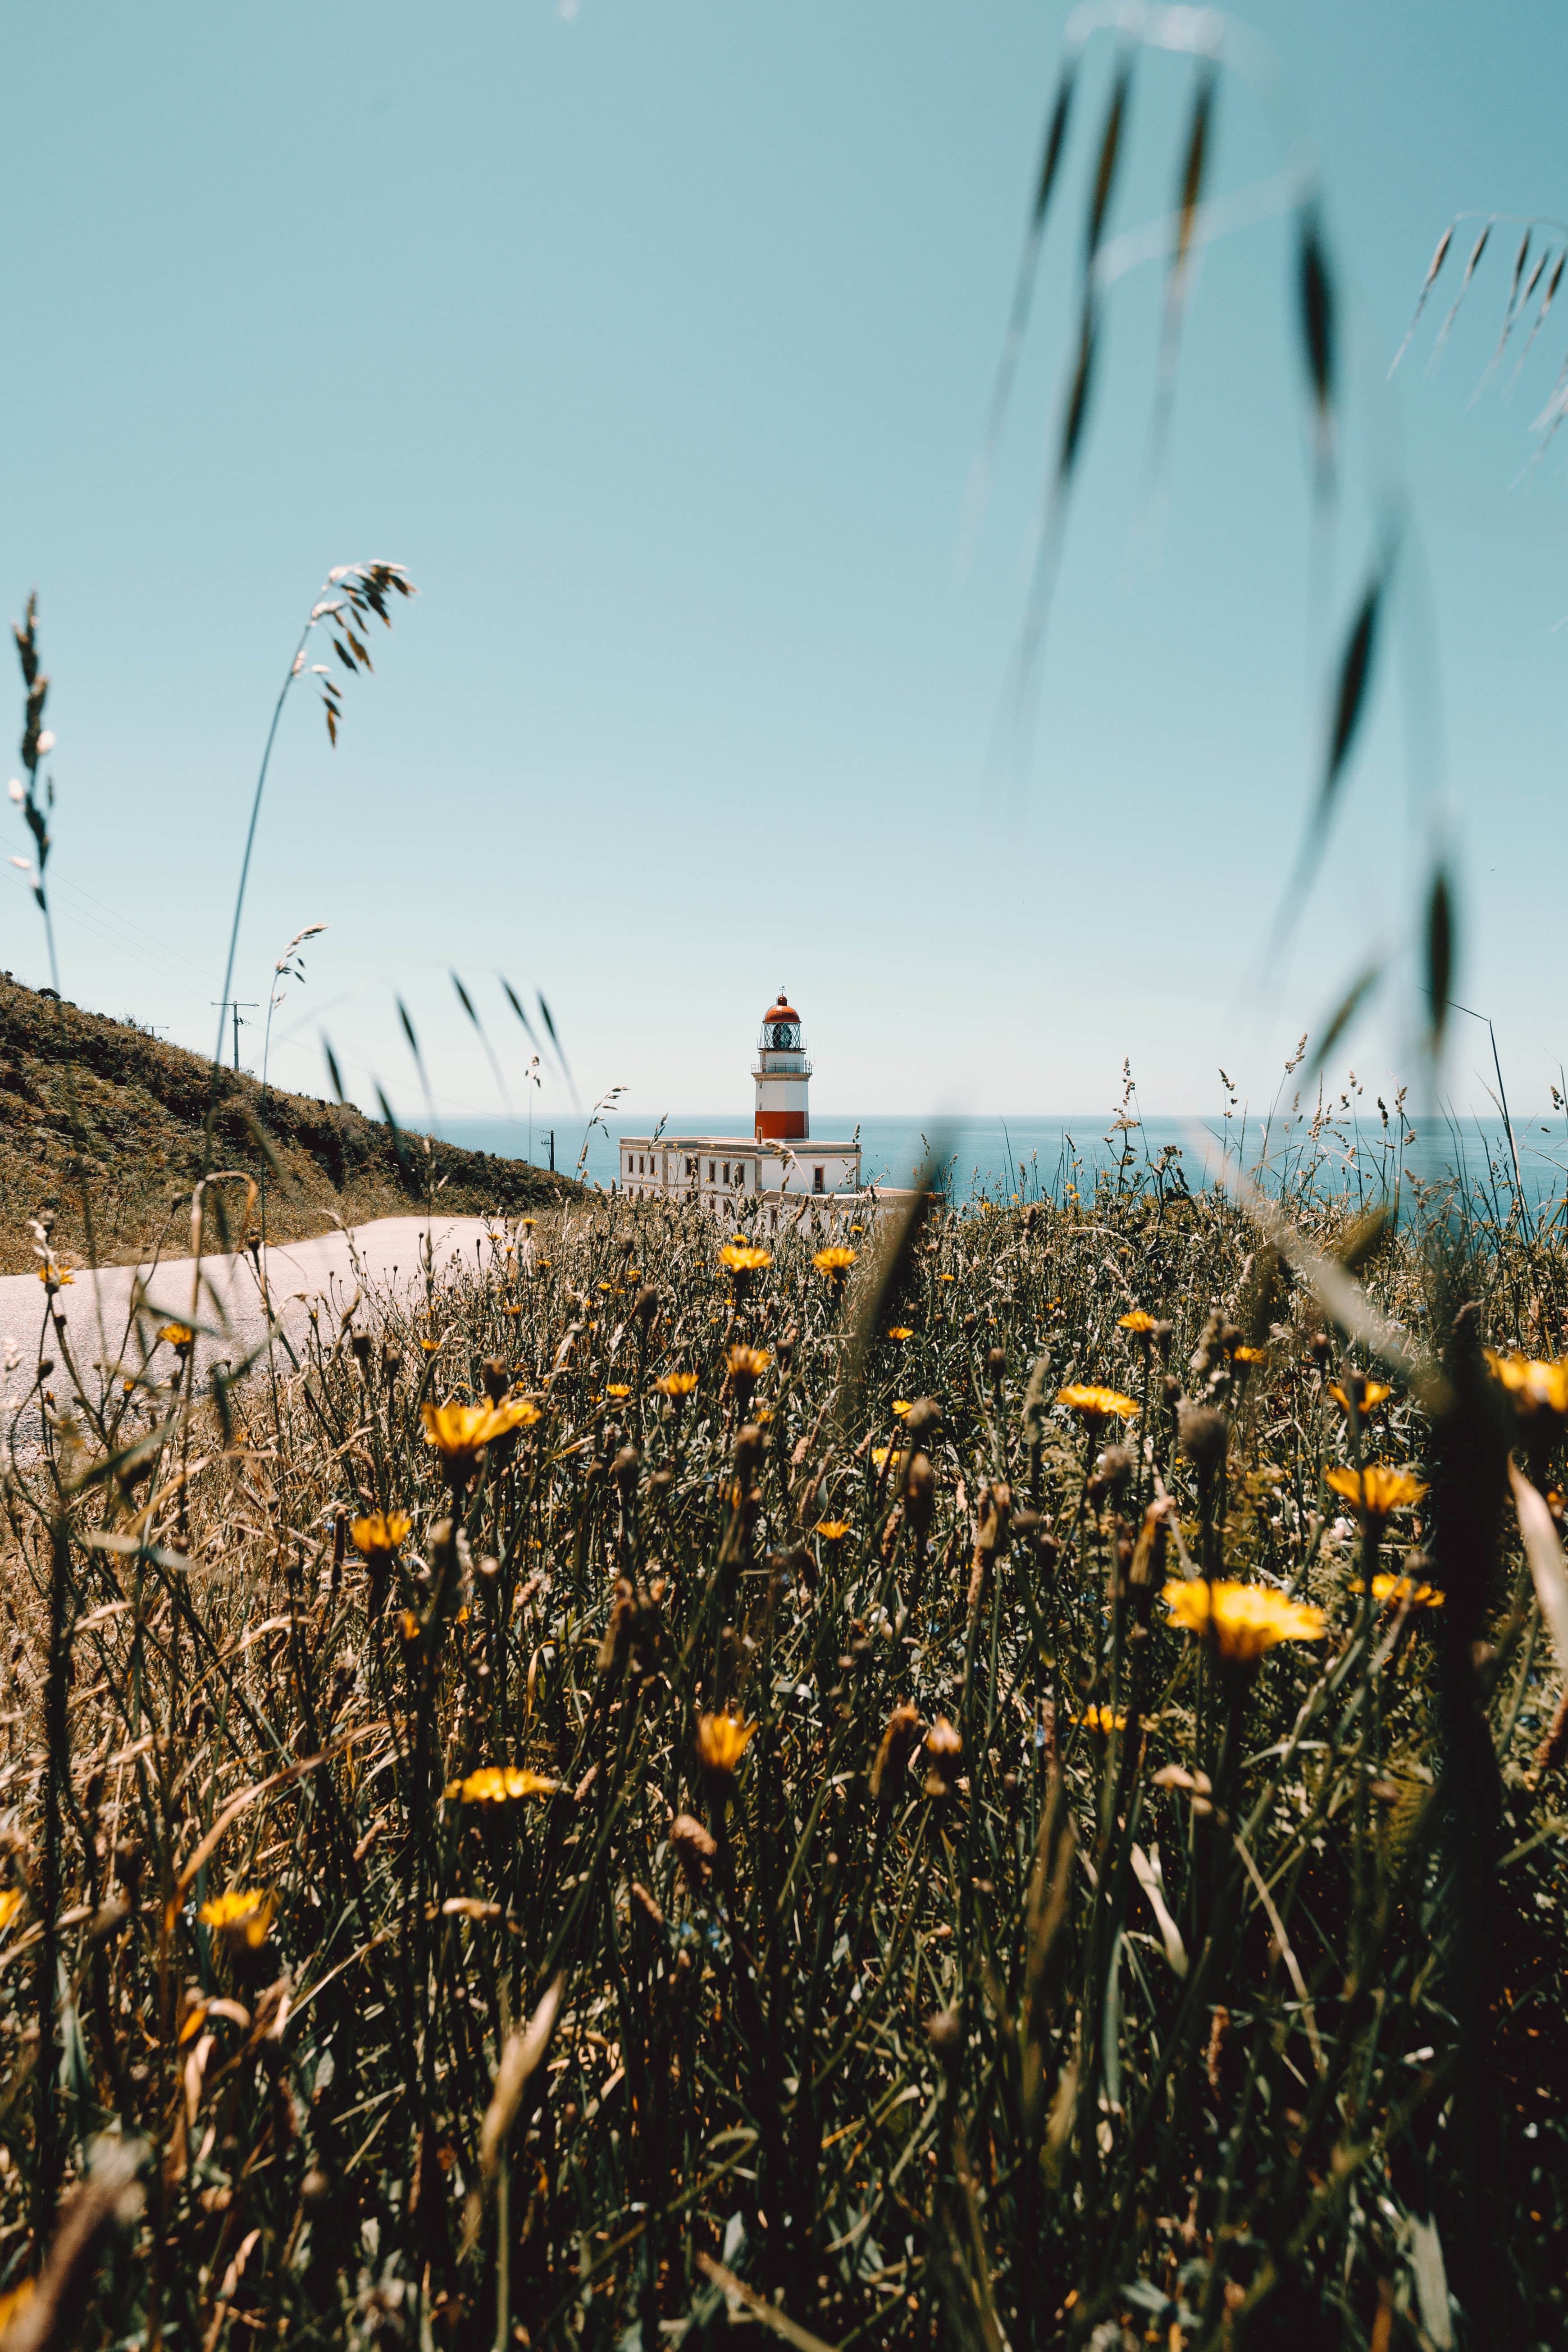 Wildflowers lighthouse, building, nature, flowers Lock Screen